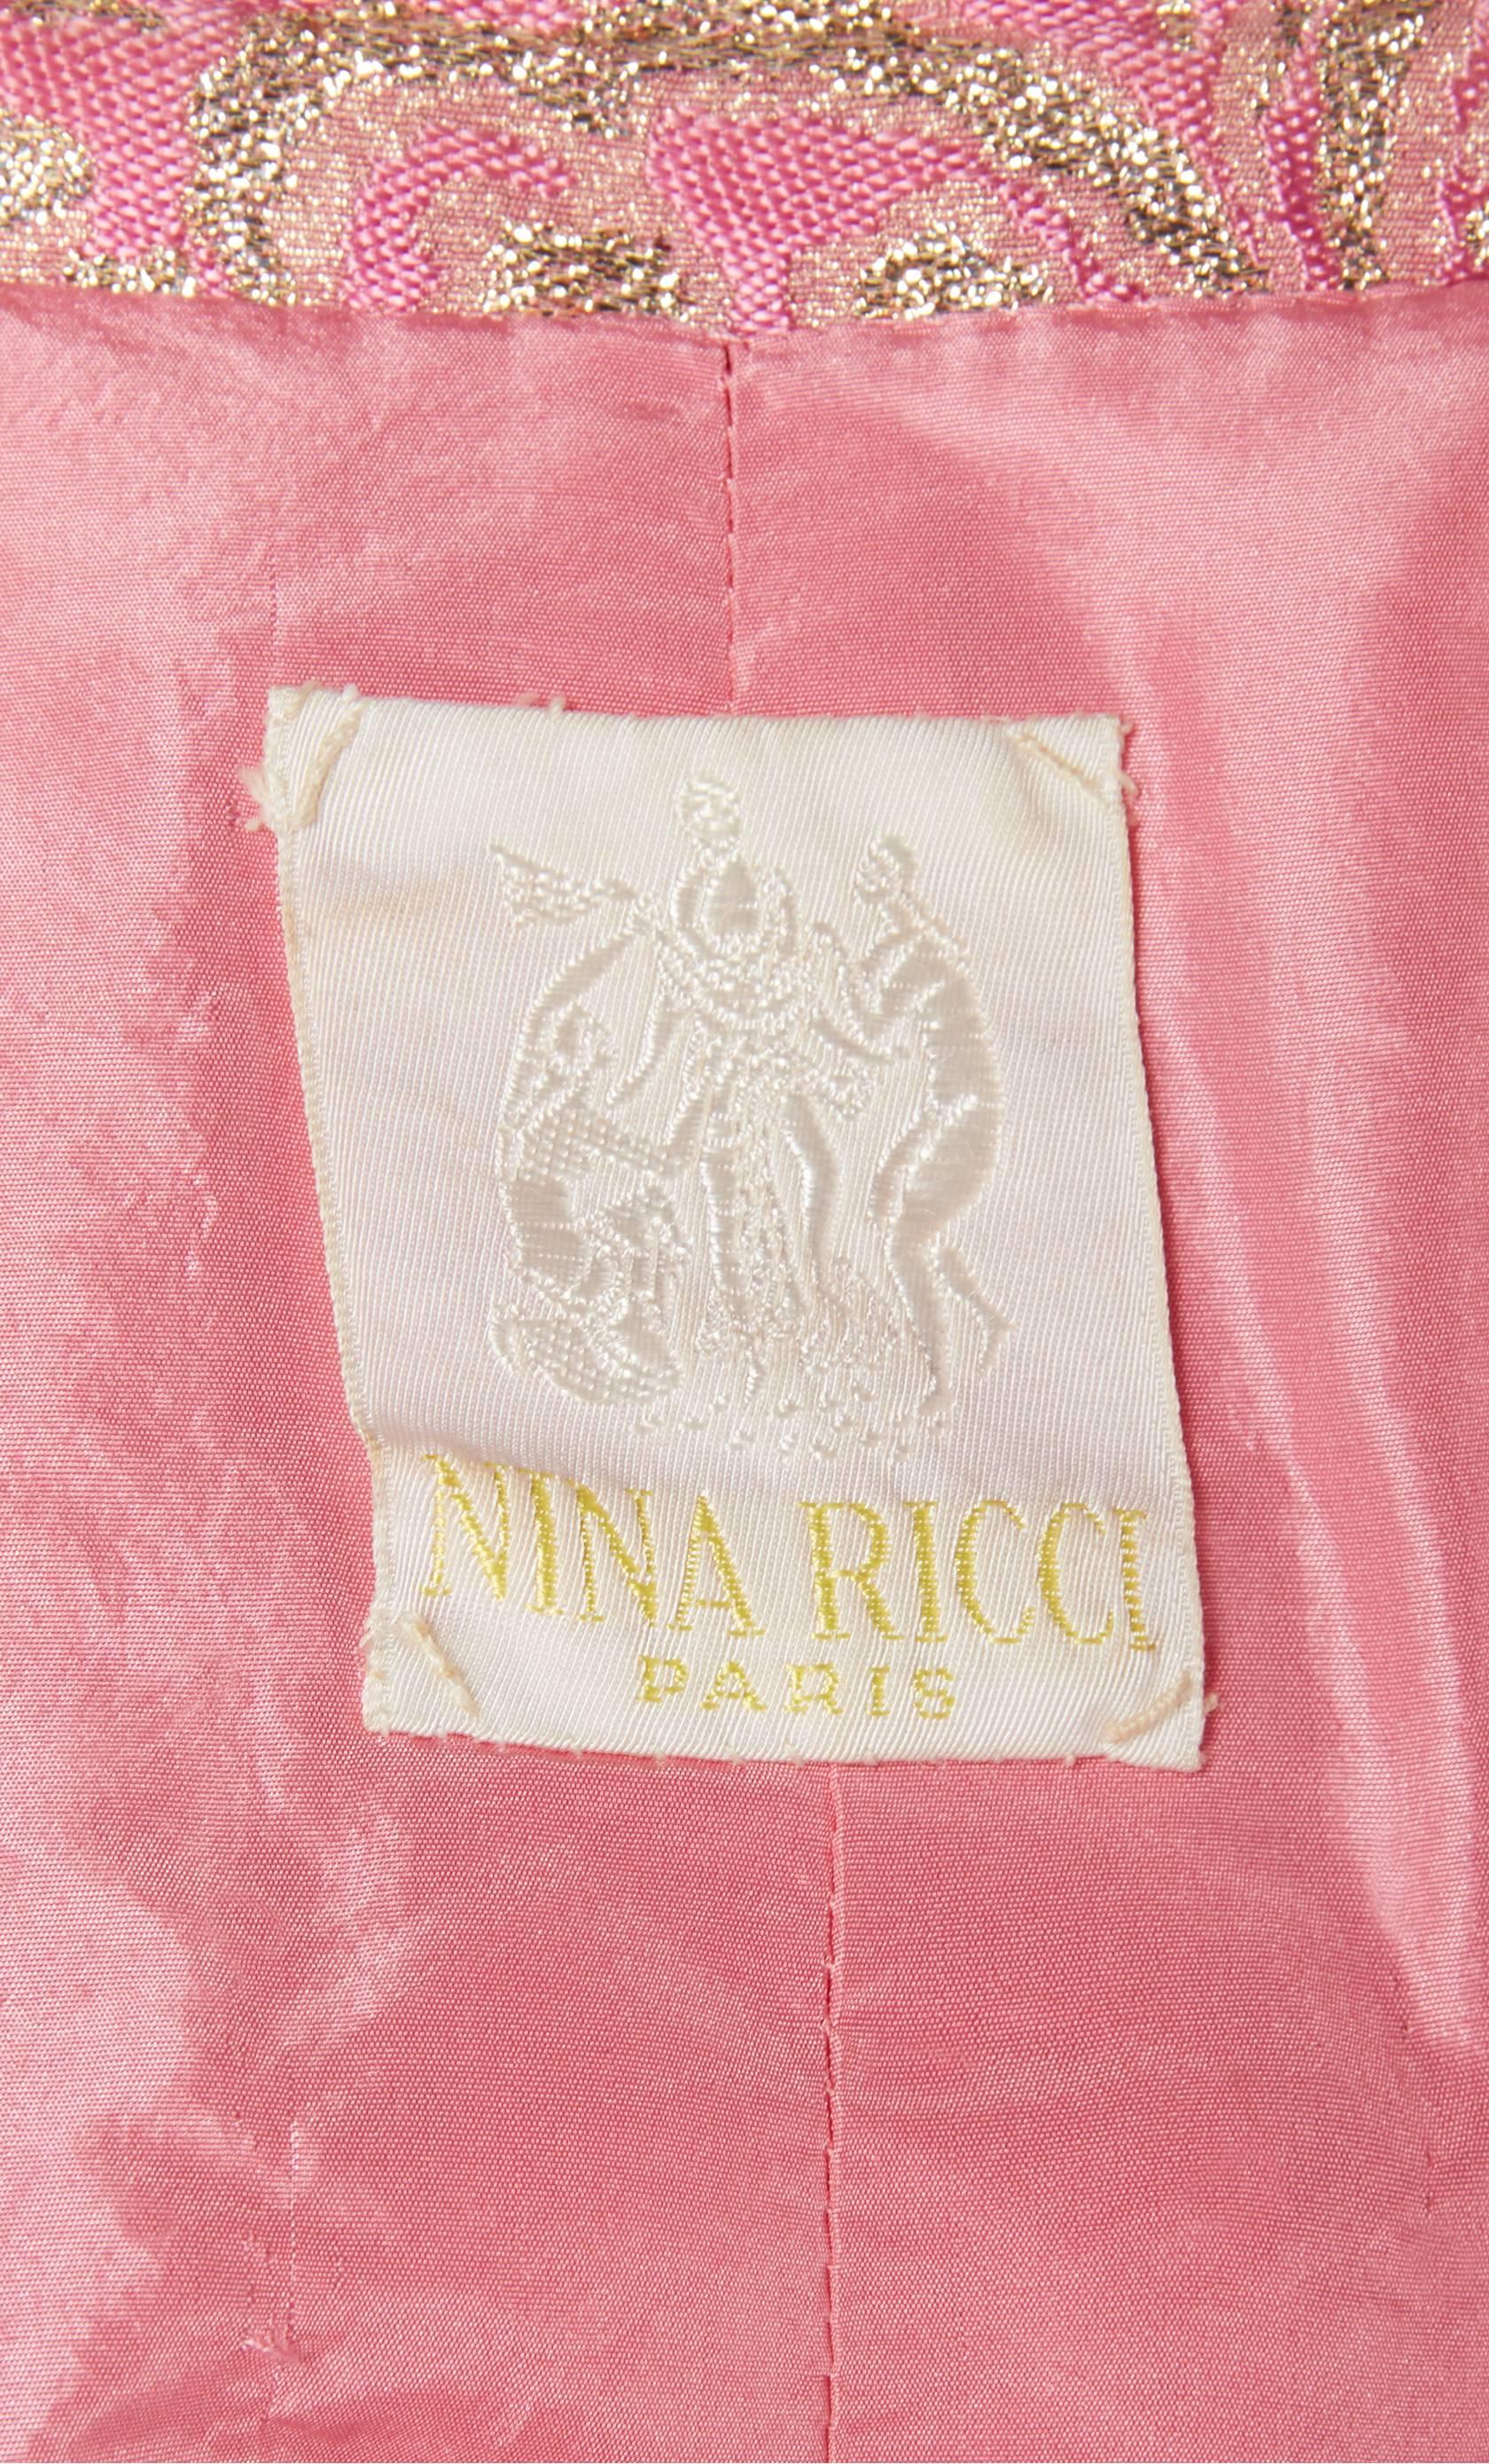 Nina Ricci haute couture pink & gold lurex coat, circa 1984 In Excellent Condition For Sale In London, GB